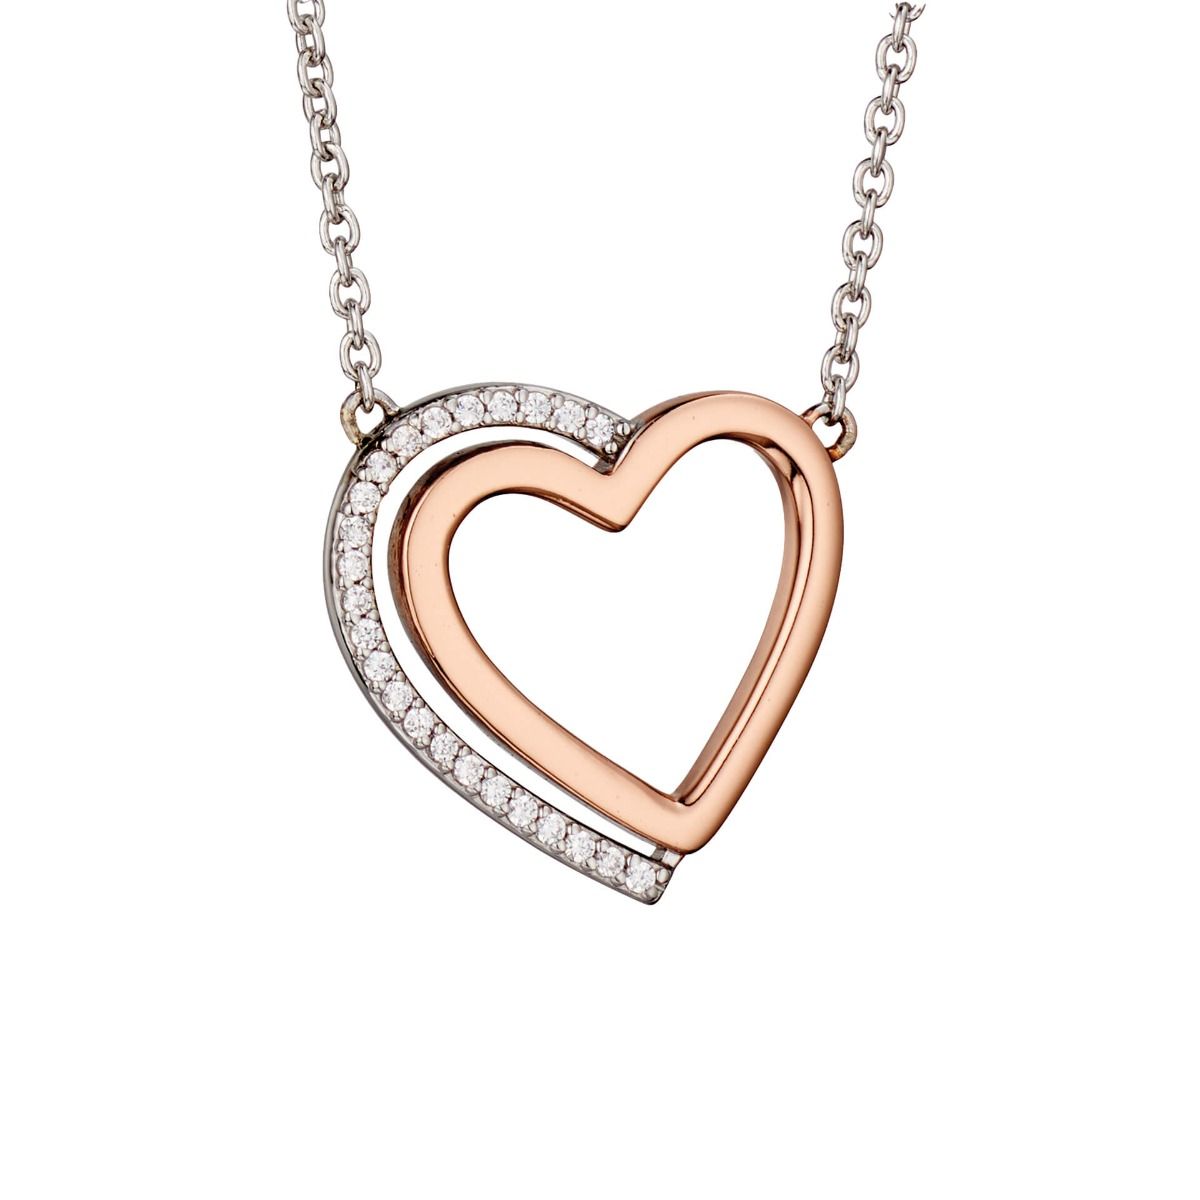 Fiorelli silver, rose gold plated detail and cubic zirconia open heart pendant